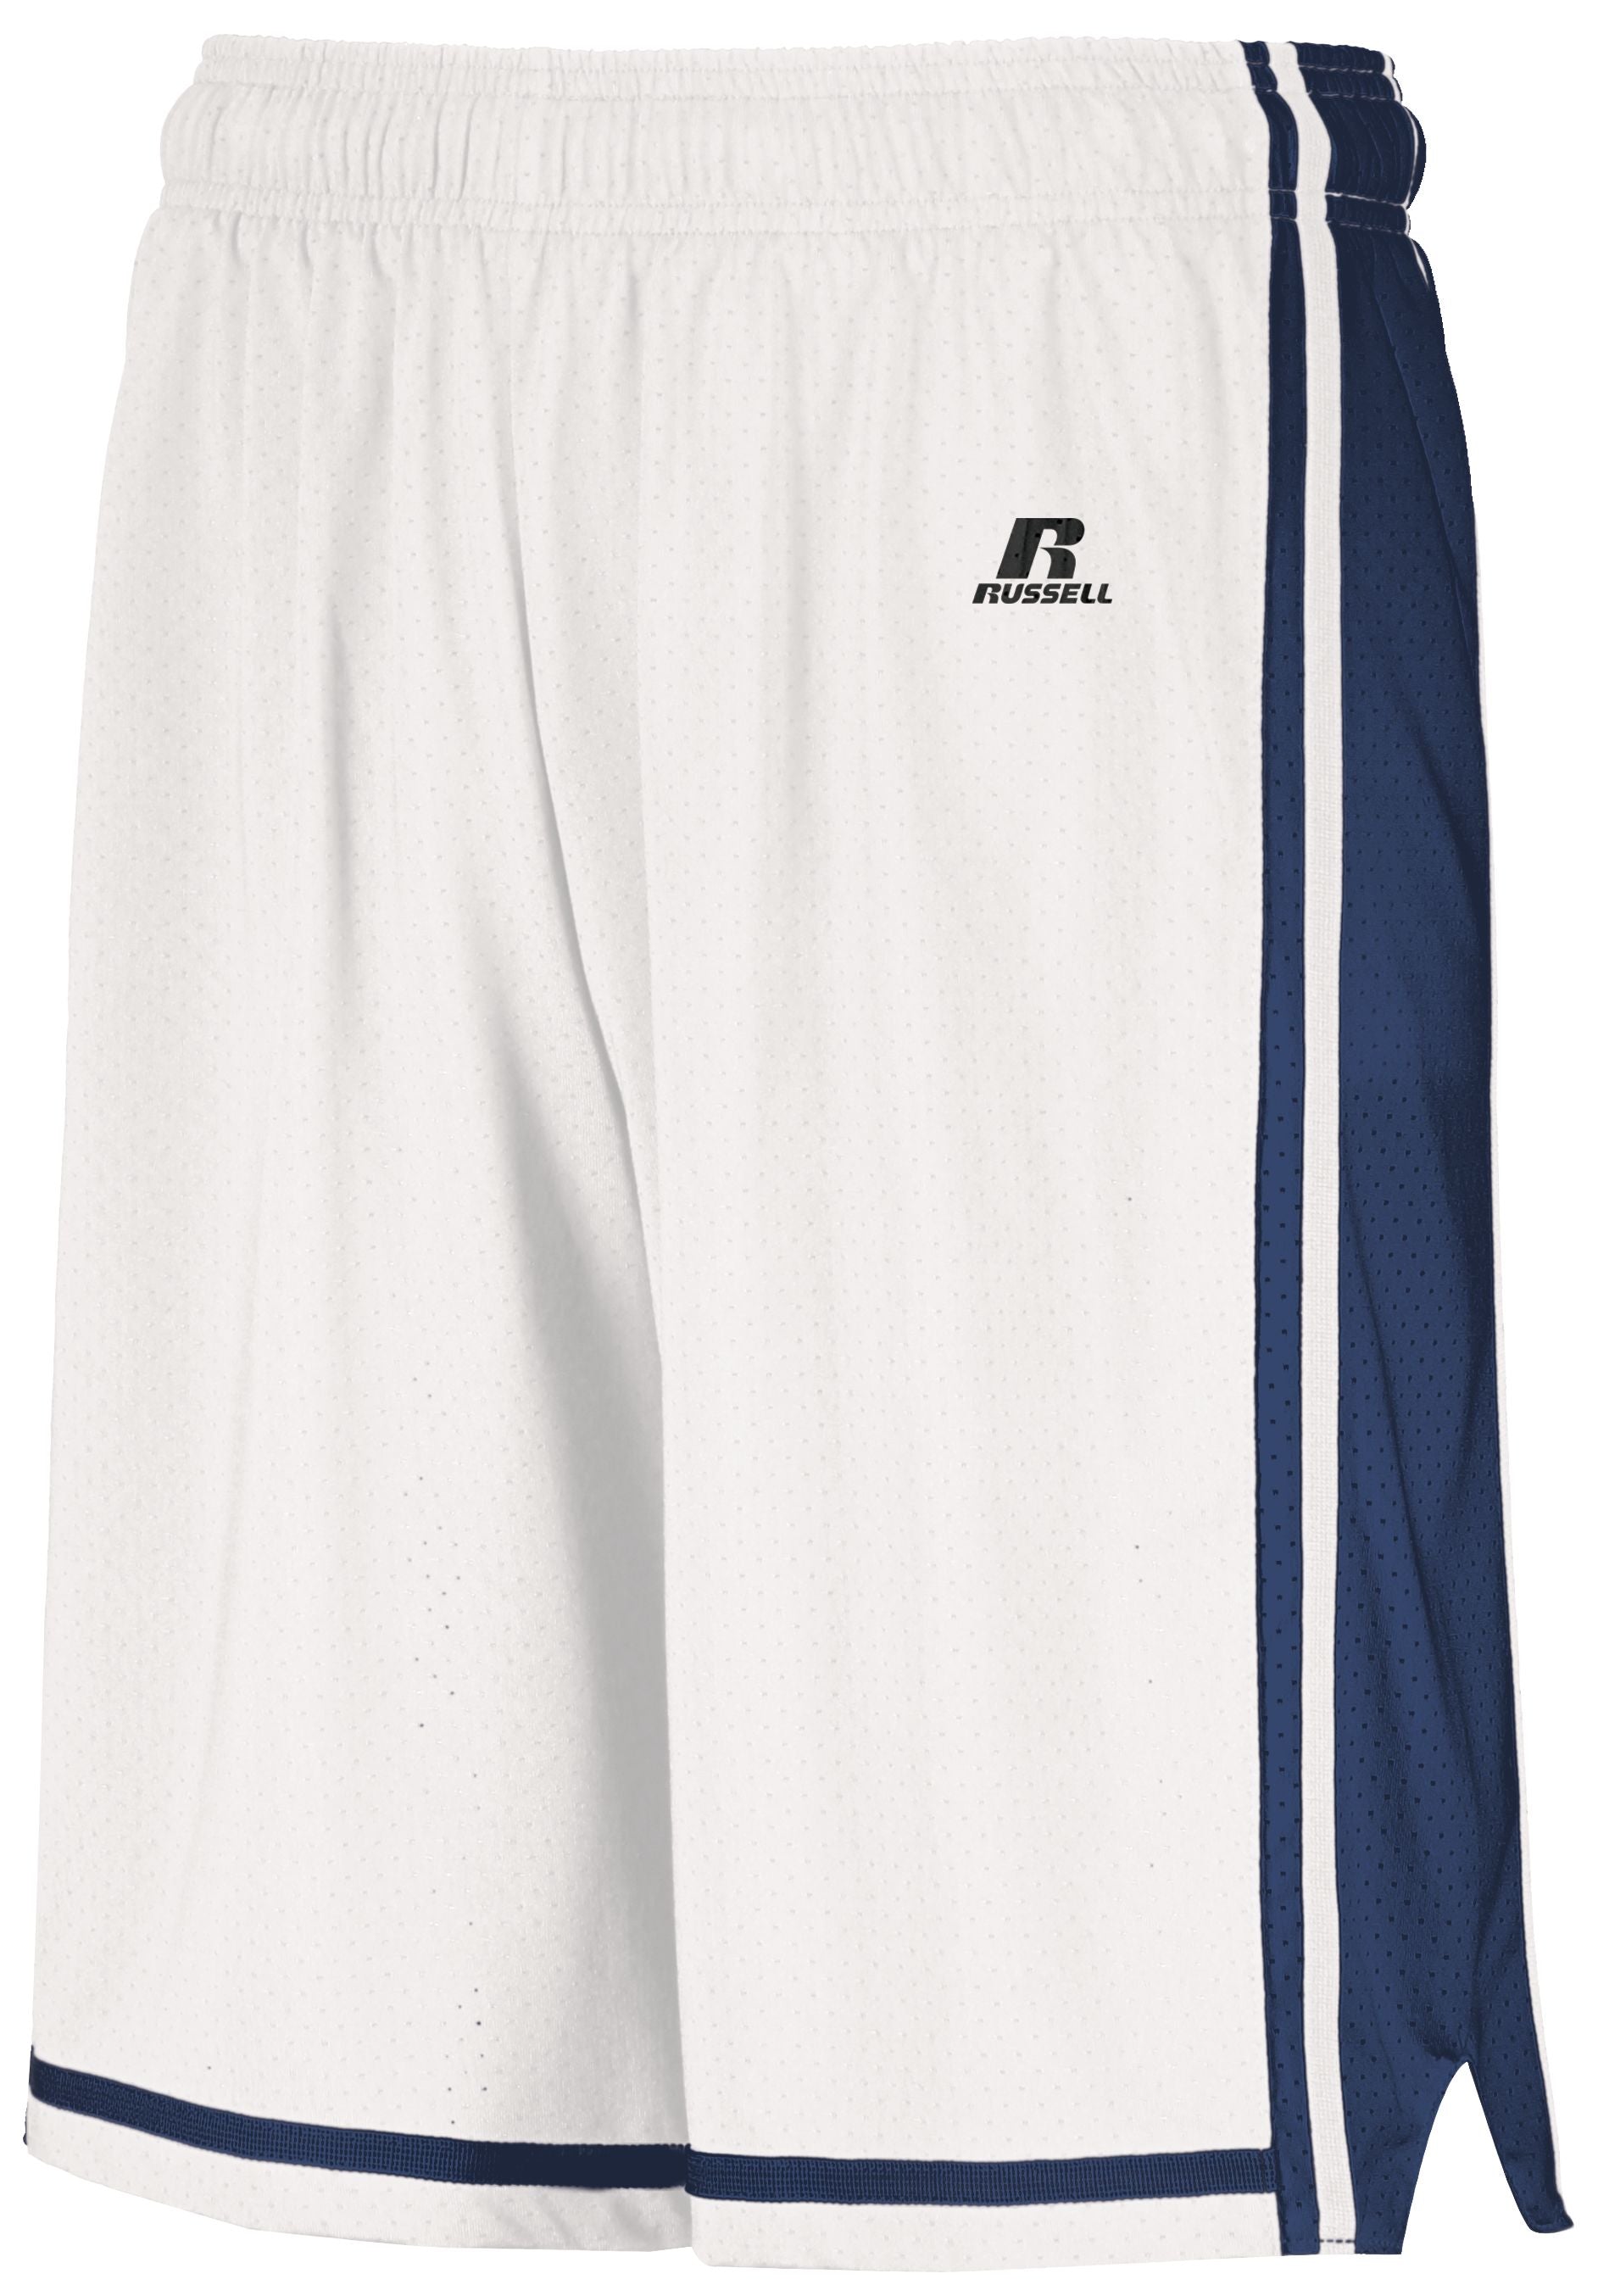 Russell Athletic Legacy Basketball Shorts in White/Navy  -Part of the Adult, Adult-Shorts, Basketball, Russell-Athletic-Products, All-Sports, All-Sports-1 product lines at KanaleyCreations.com